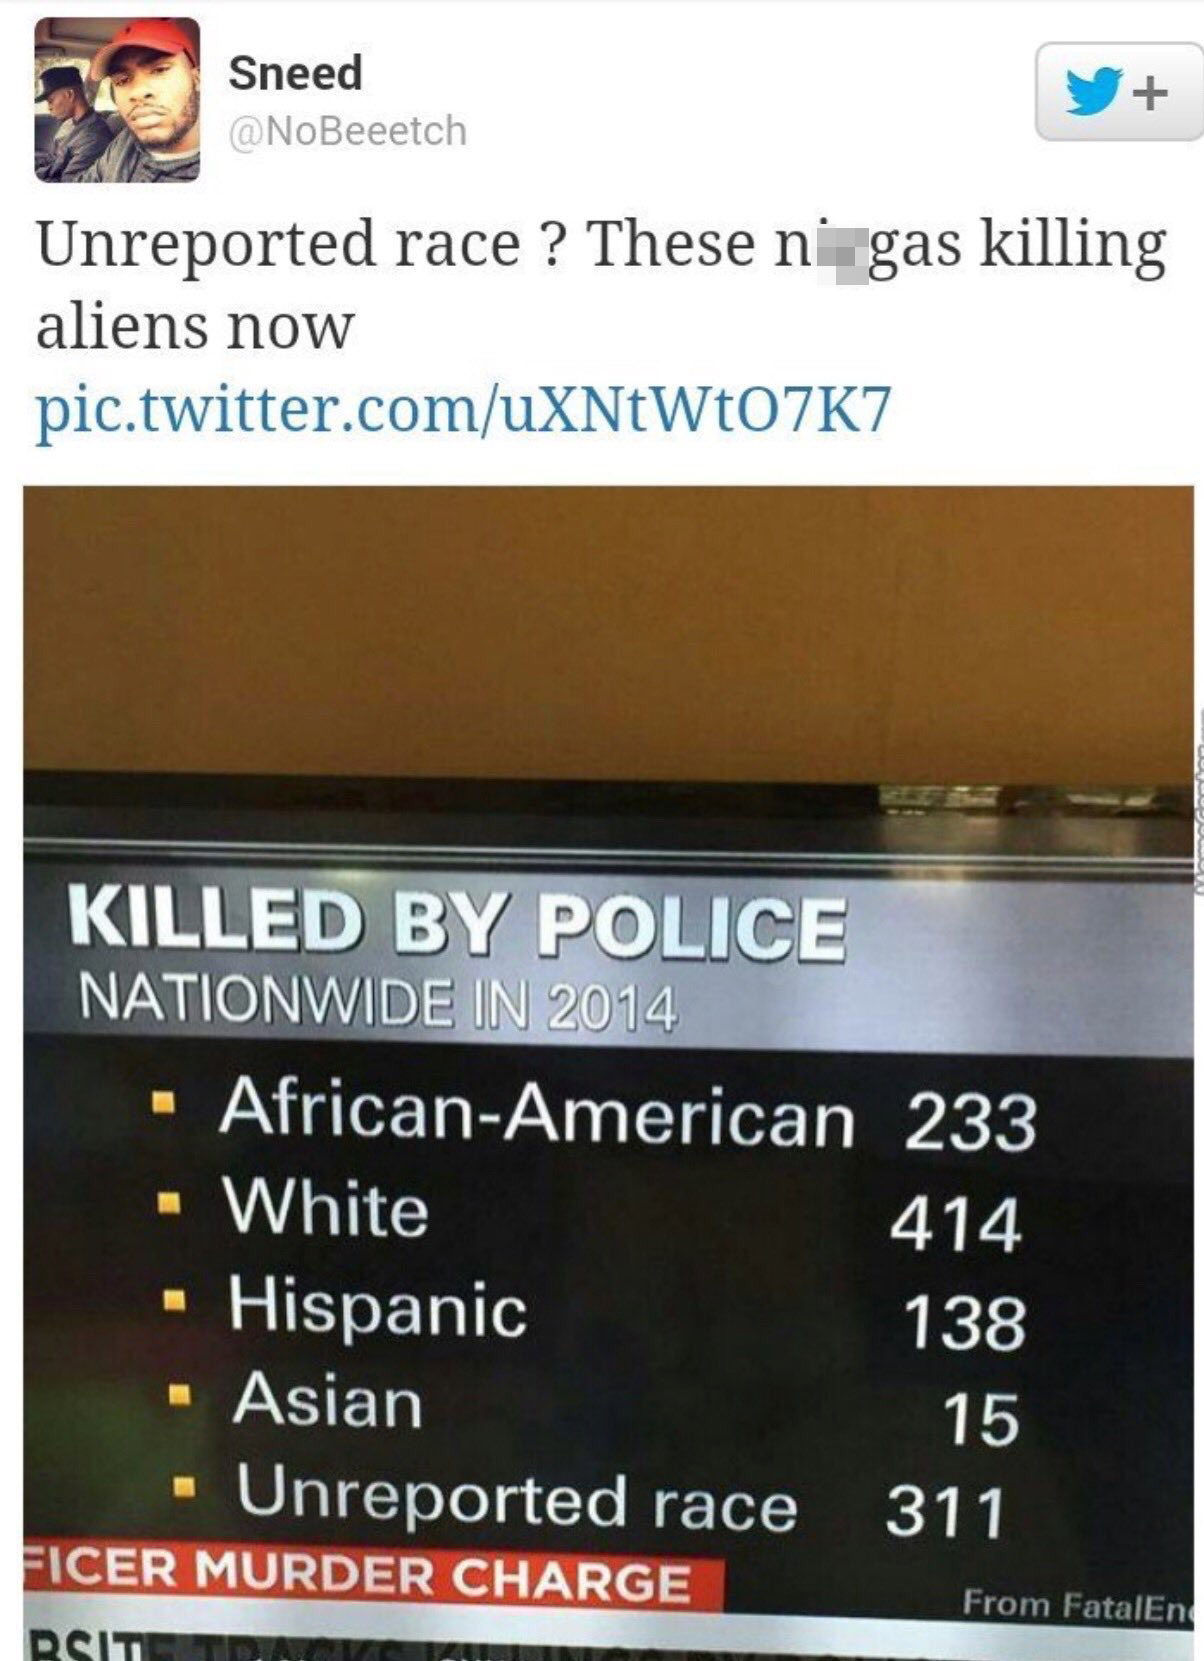 tweet - software - Sneed NoBeeetch Unreported race? These ni gas killing aliens now pic.twitter.comuXNtWt07K7 Killed By Police Nationwide In 2014 AfricanAmerican 233 White 414 Hispanic 138 Asian 15 Unreported race 311 Ficer Murder Charge From Fatalen Bsit